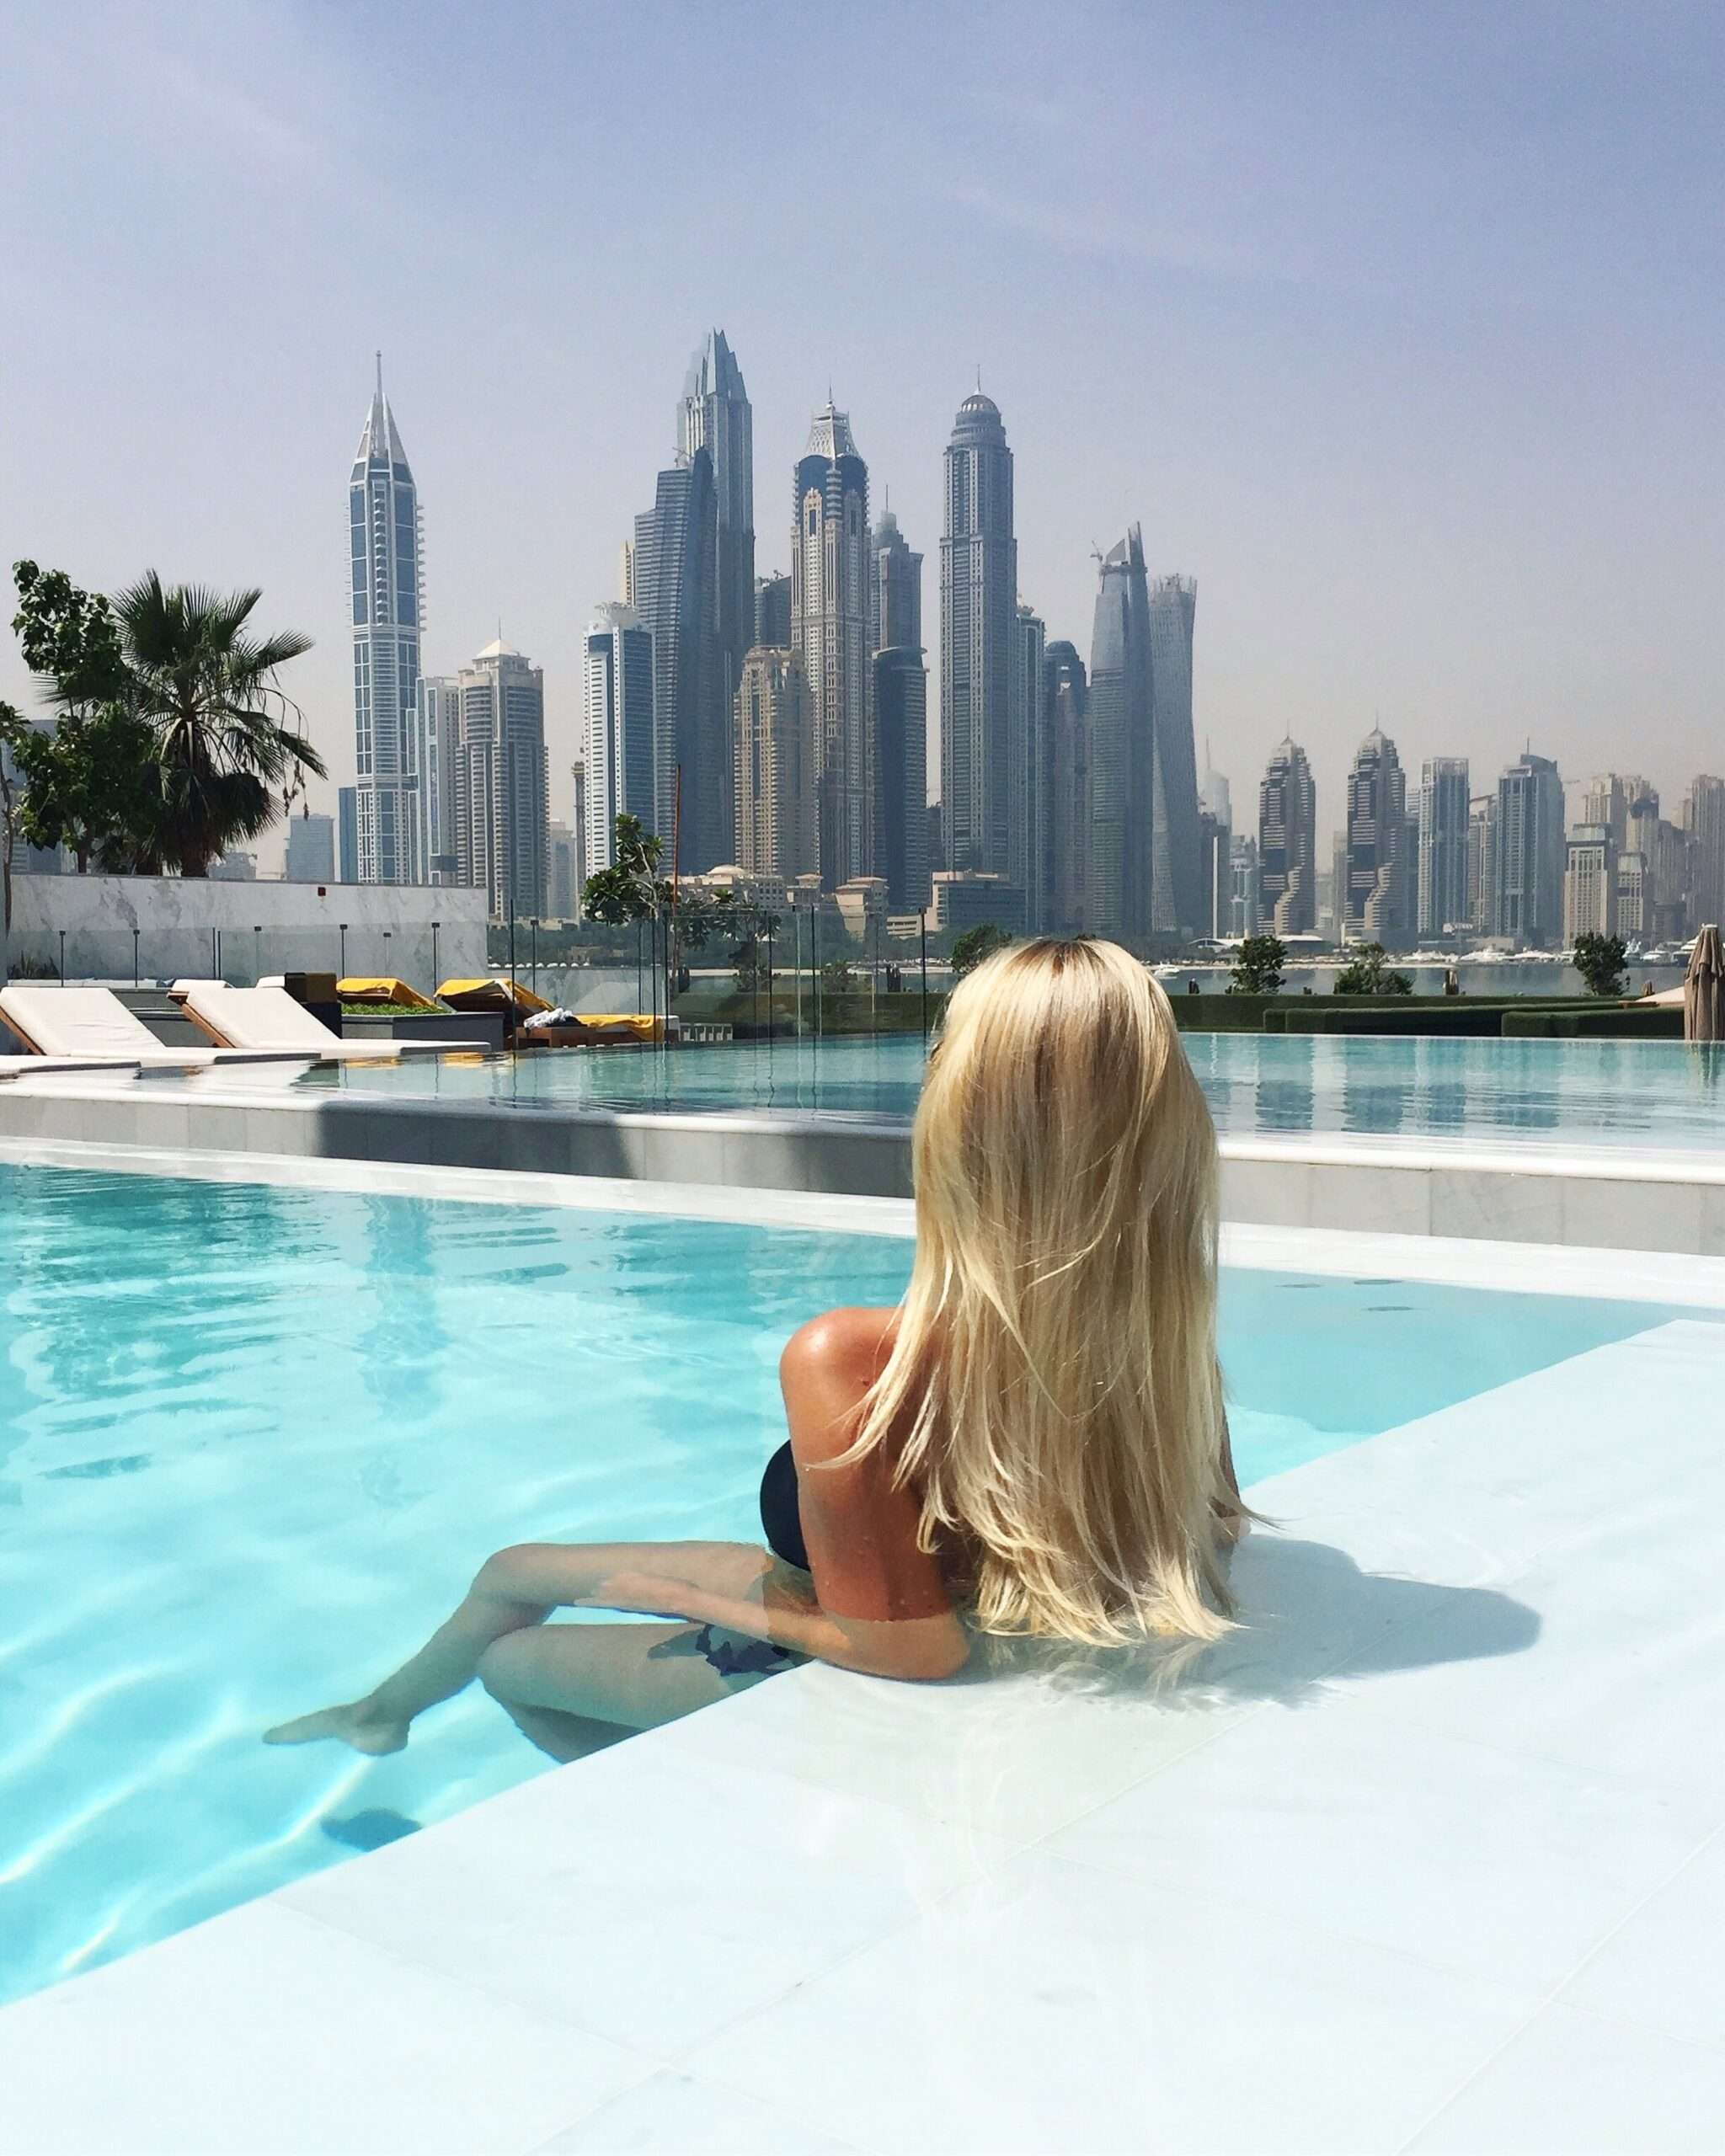 Working beautiful girls m in Dubai: in-demand professions and employment advice